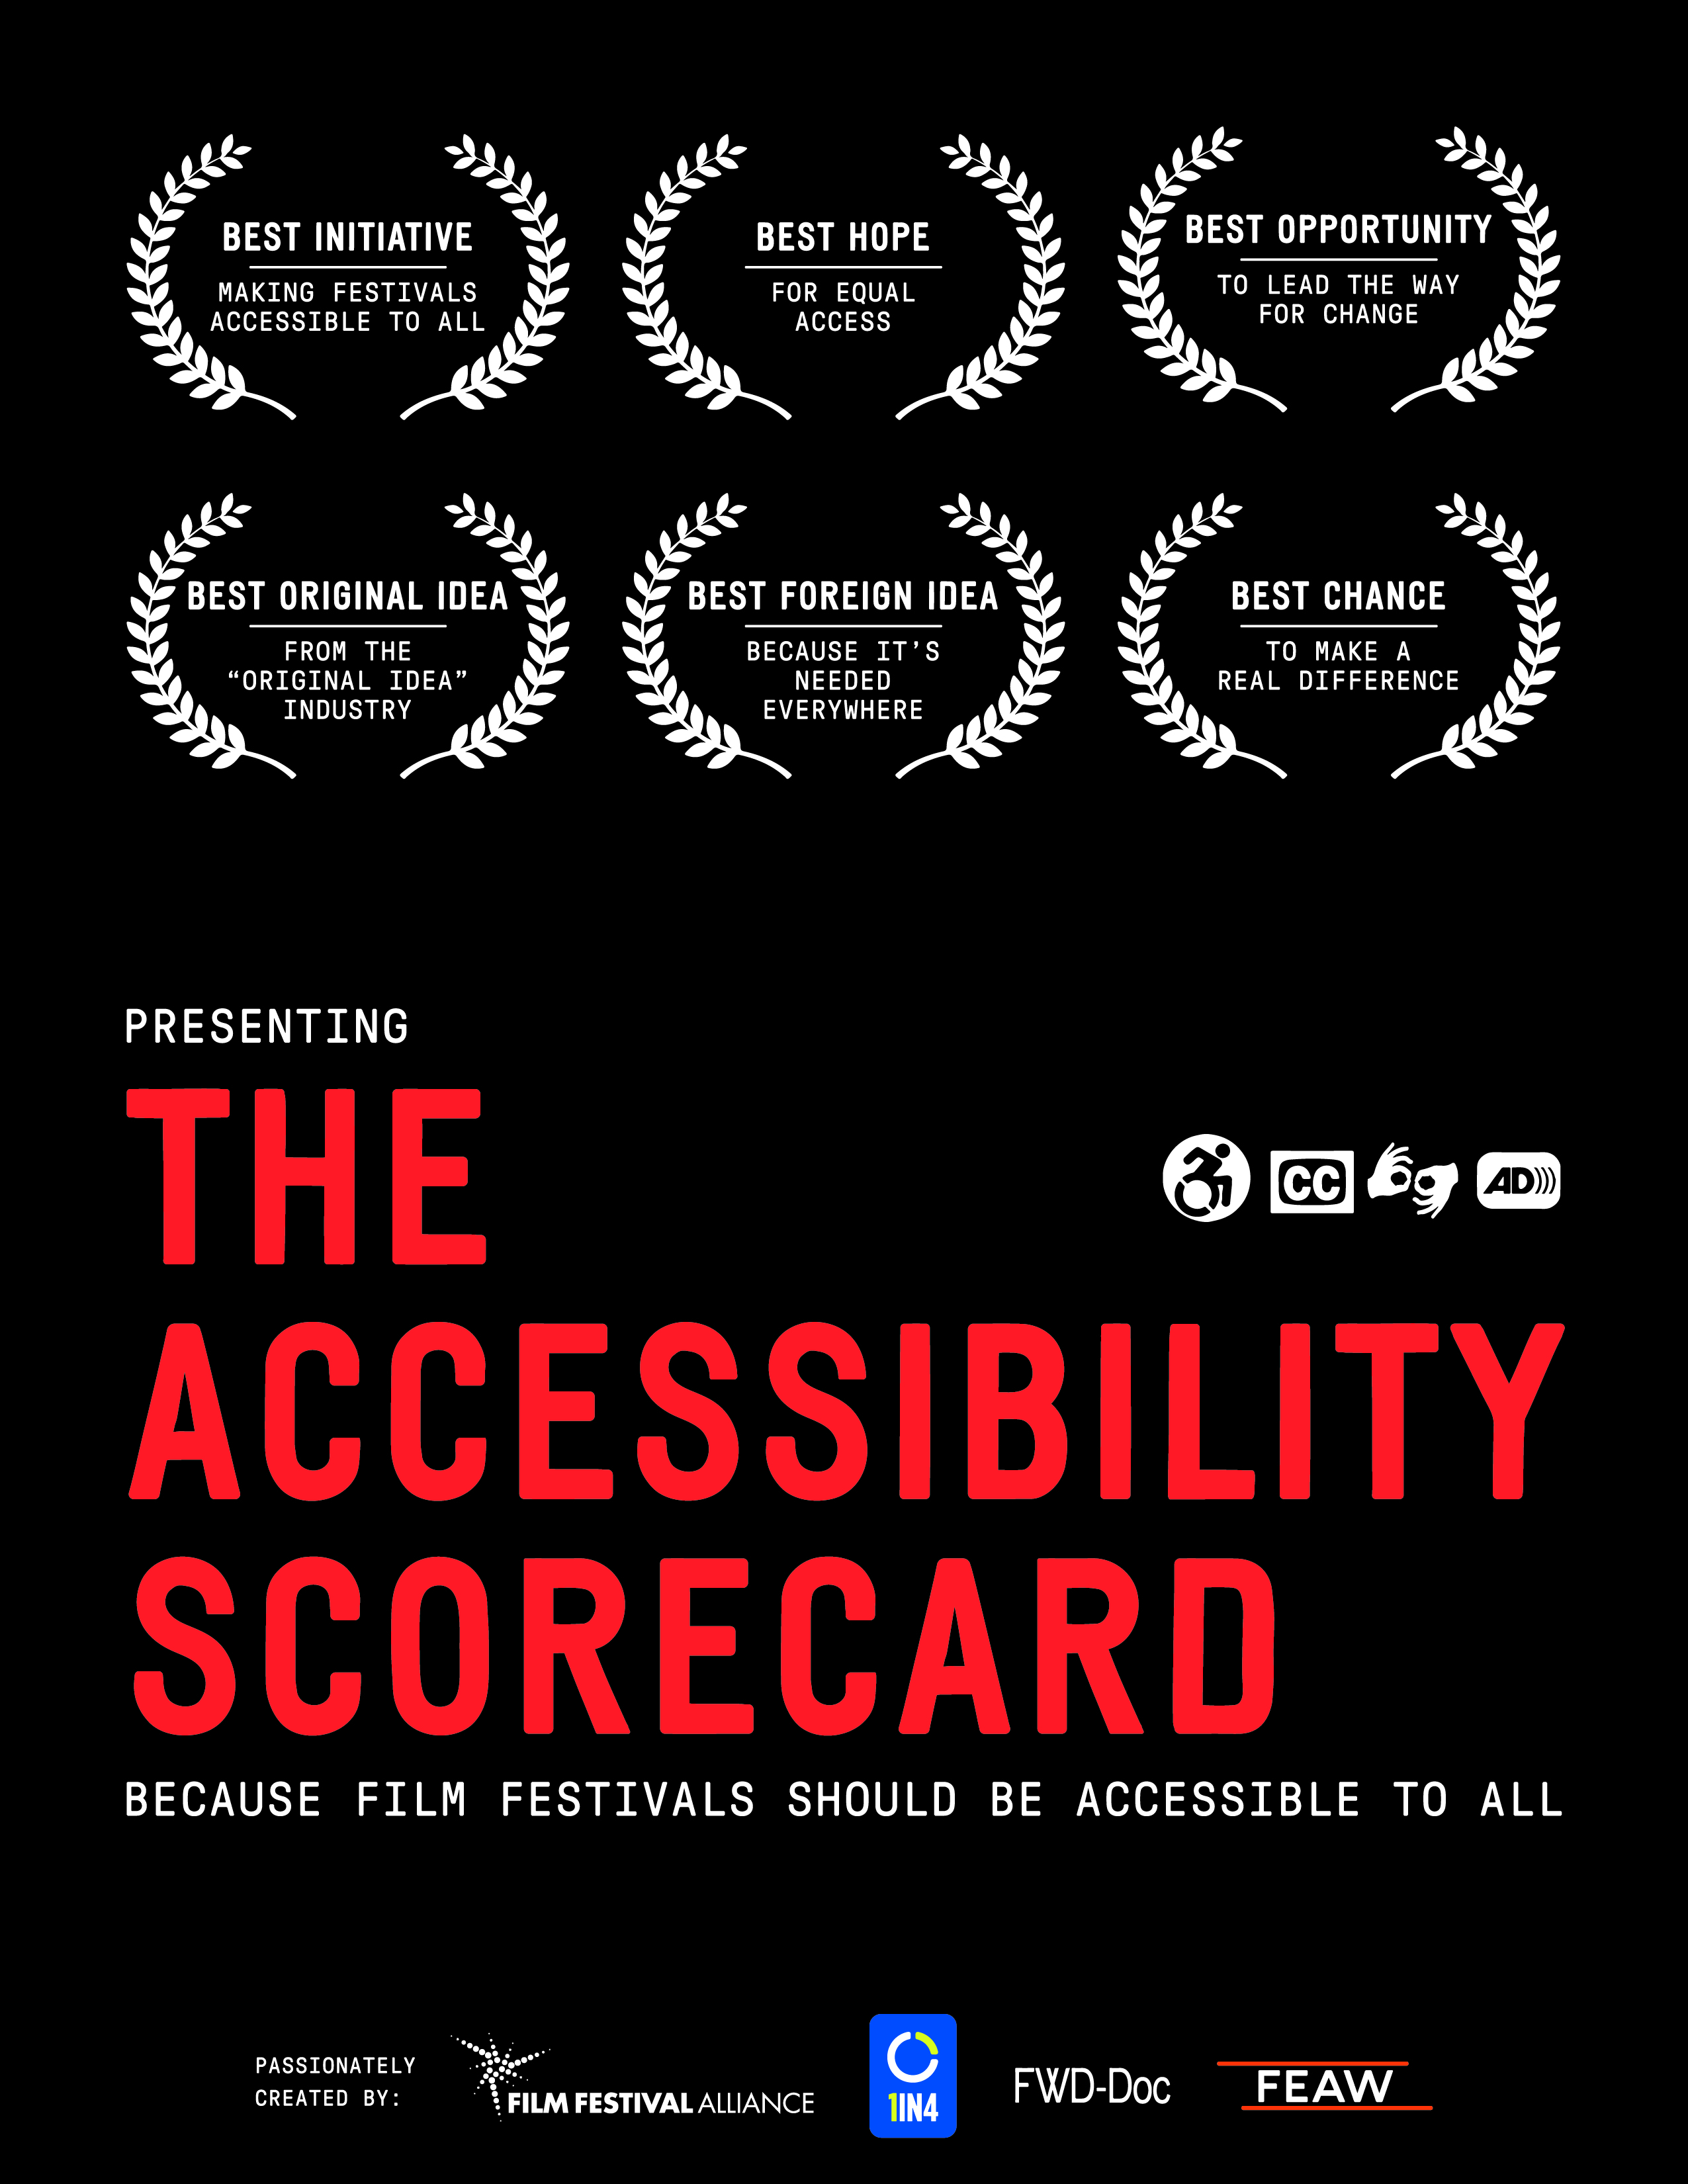 FWD-Doc's "Accessibility scorecard" with caption, "Because film festivals should be accessible to all."